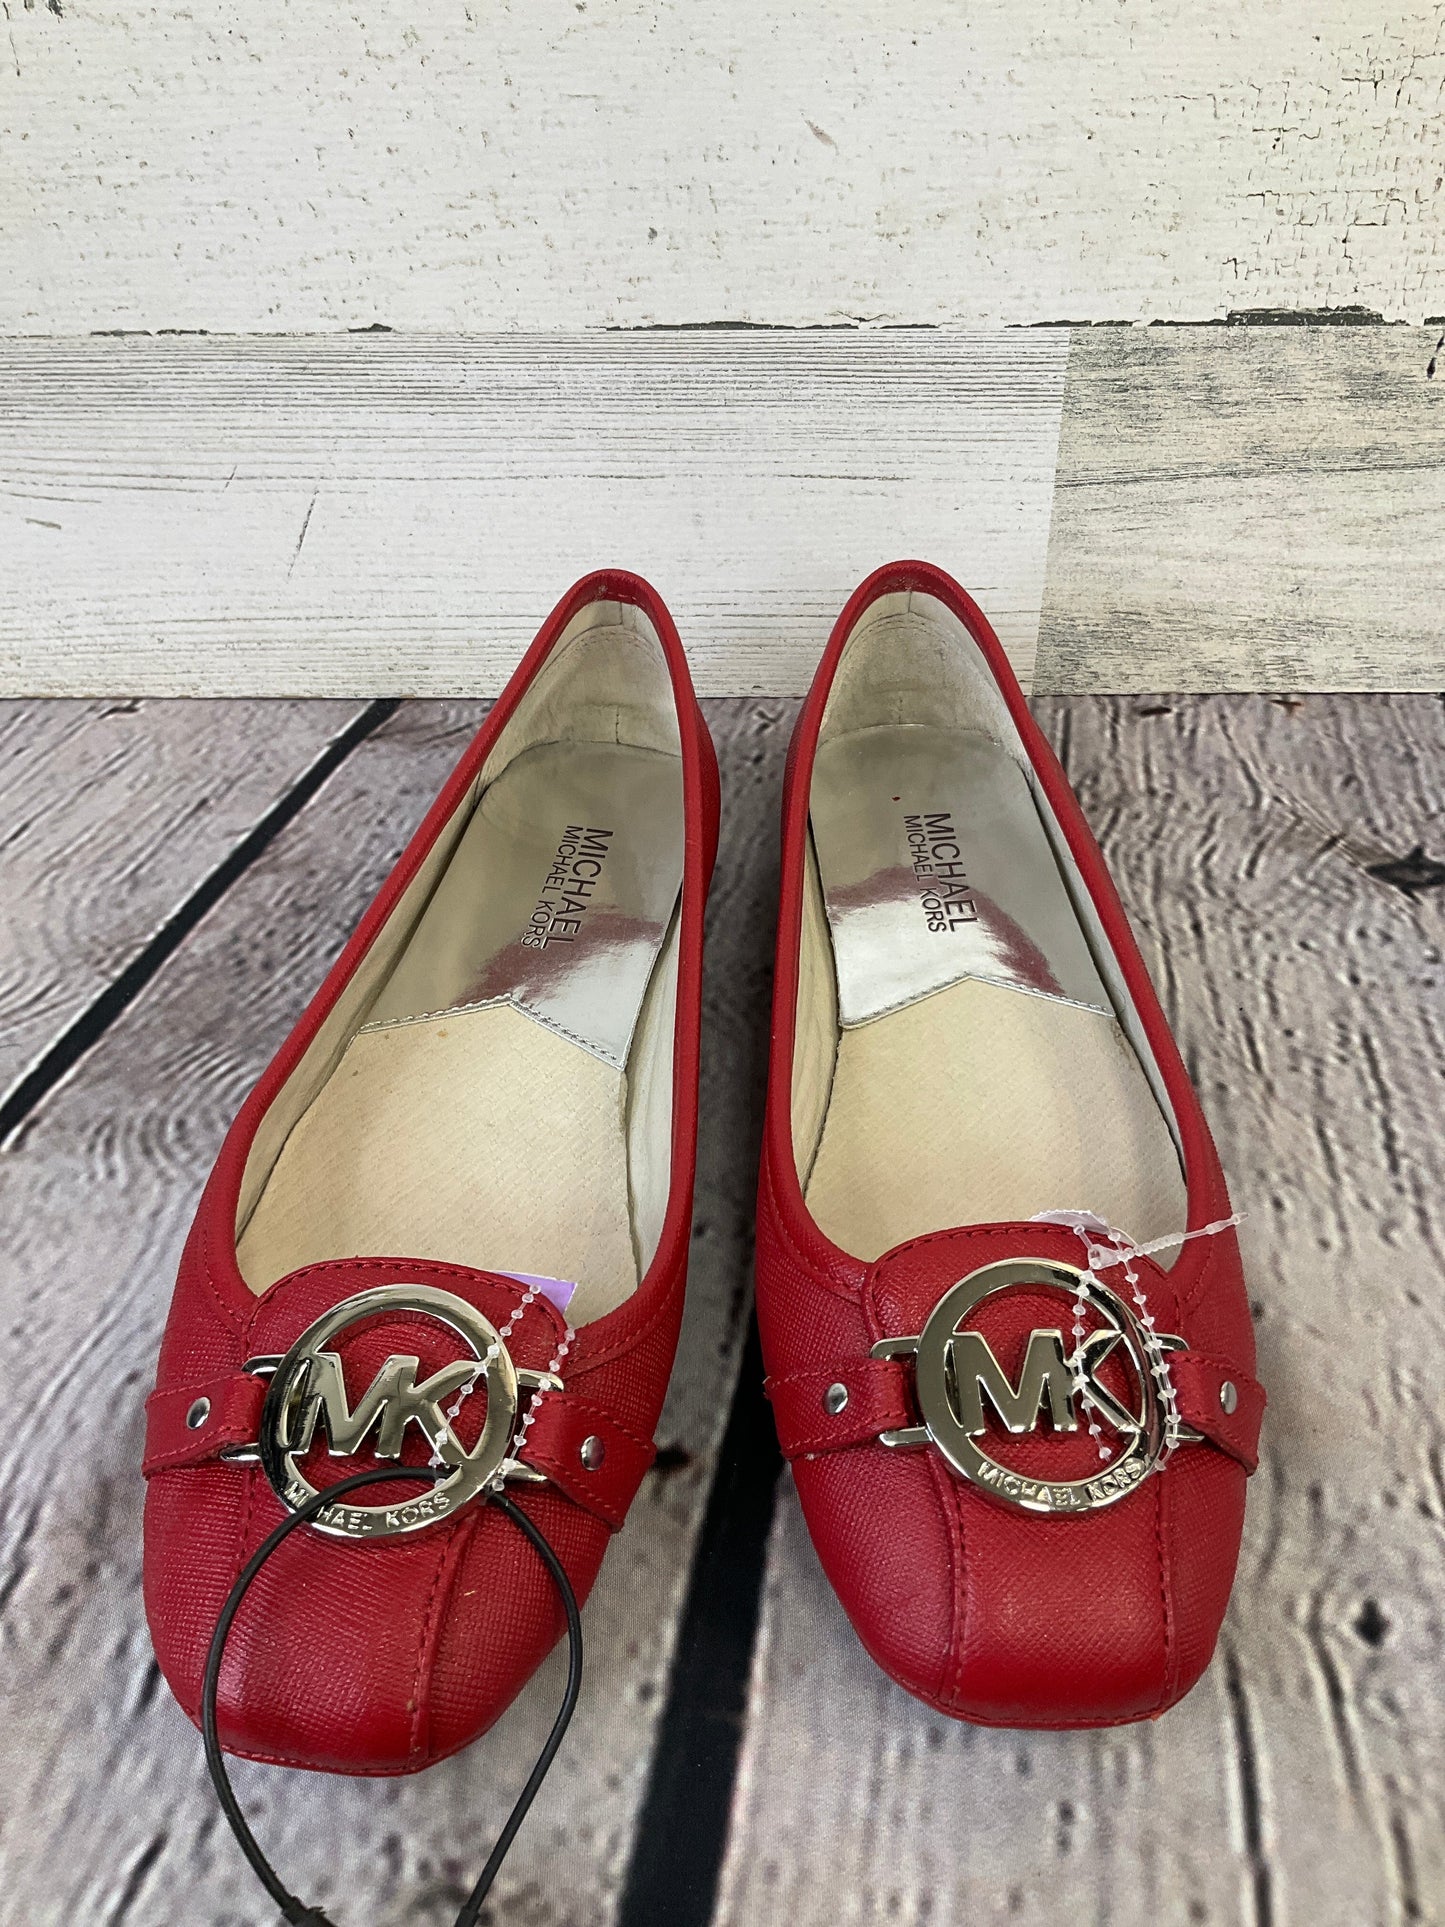 Red Shoes Flats Michael Kors, Size 7.5